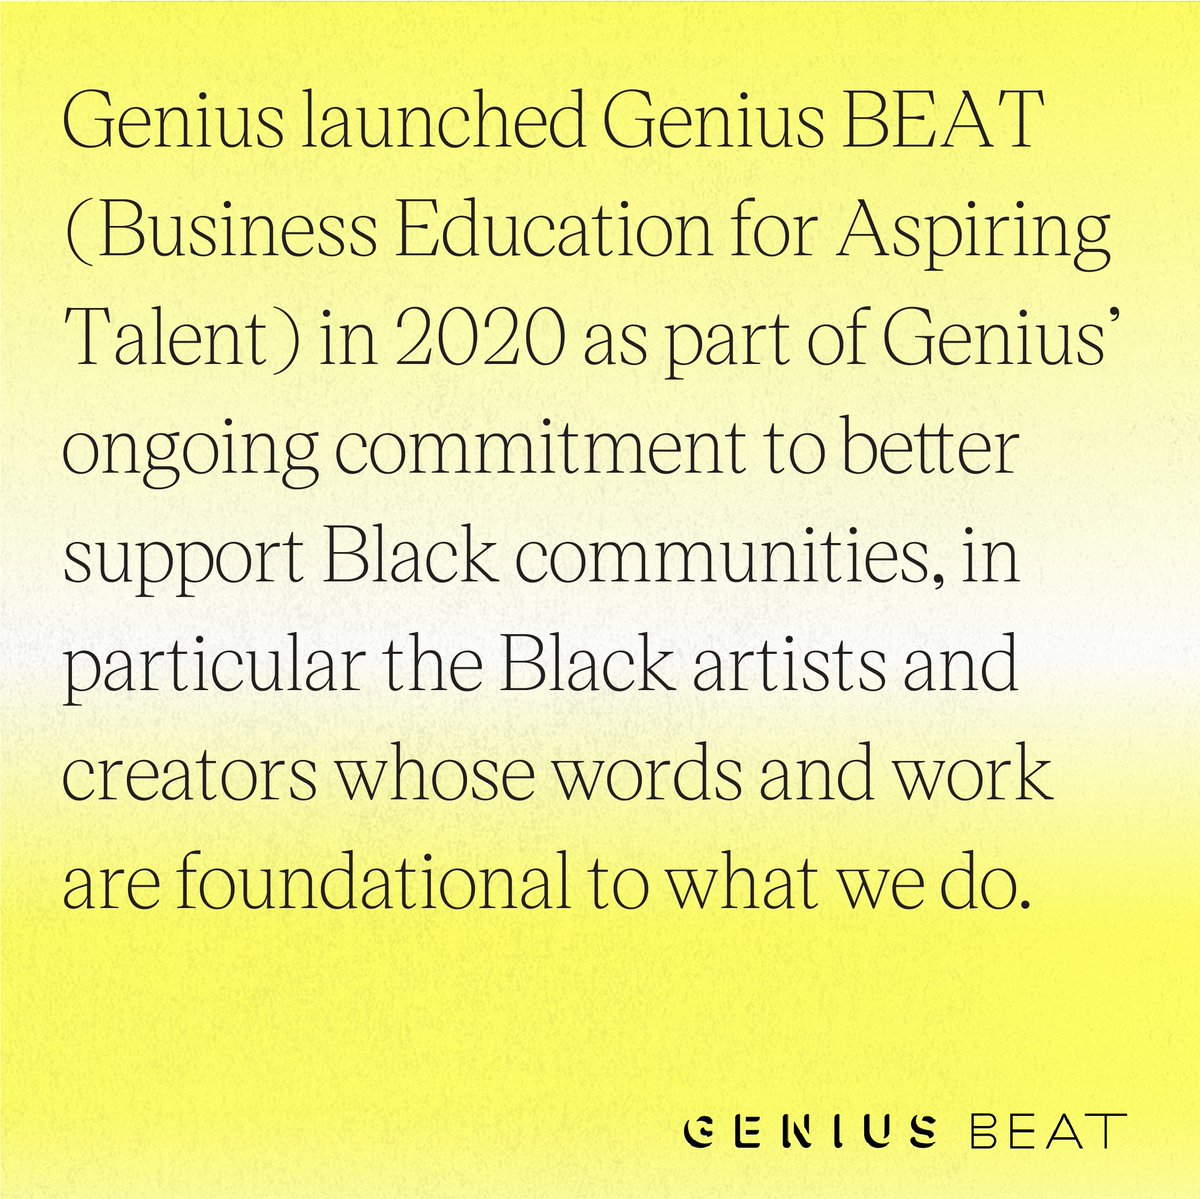 are you an artist hoping to learn more about music management? make sure to pull up to our latest #GeniusBEAT seminar on april 12 to learn about what managers do, how to pick a manager, and more

register here: so.genius.com/1gp7Lxa